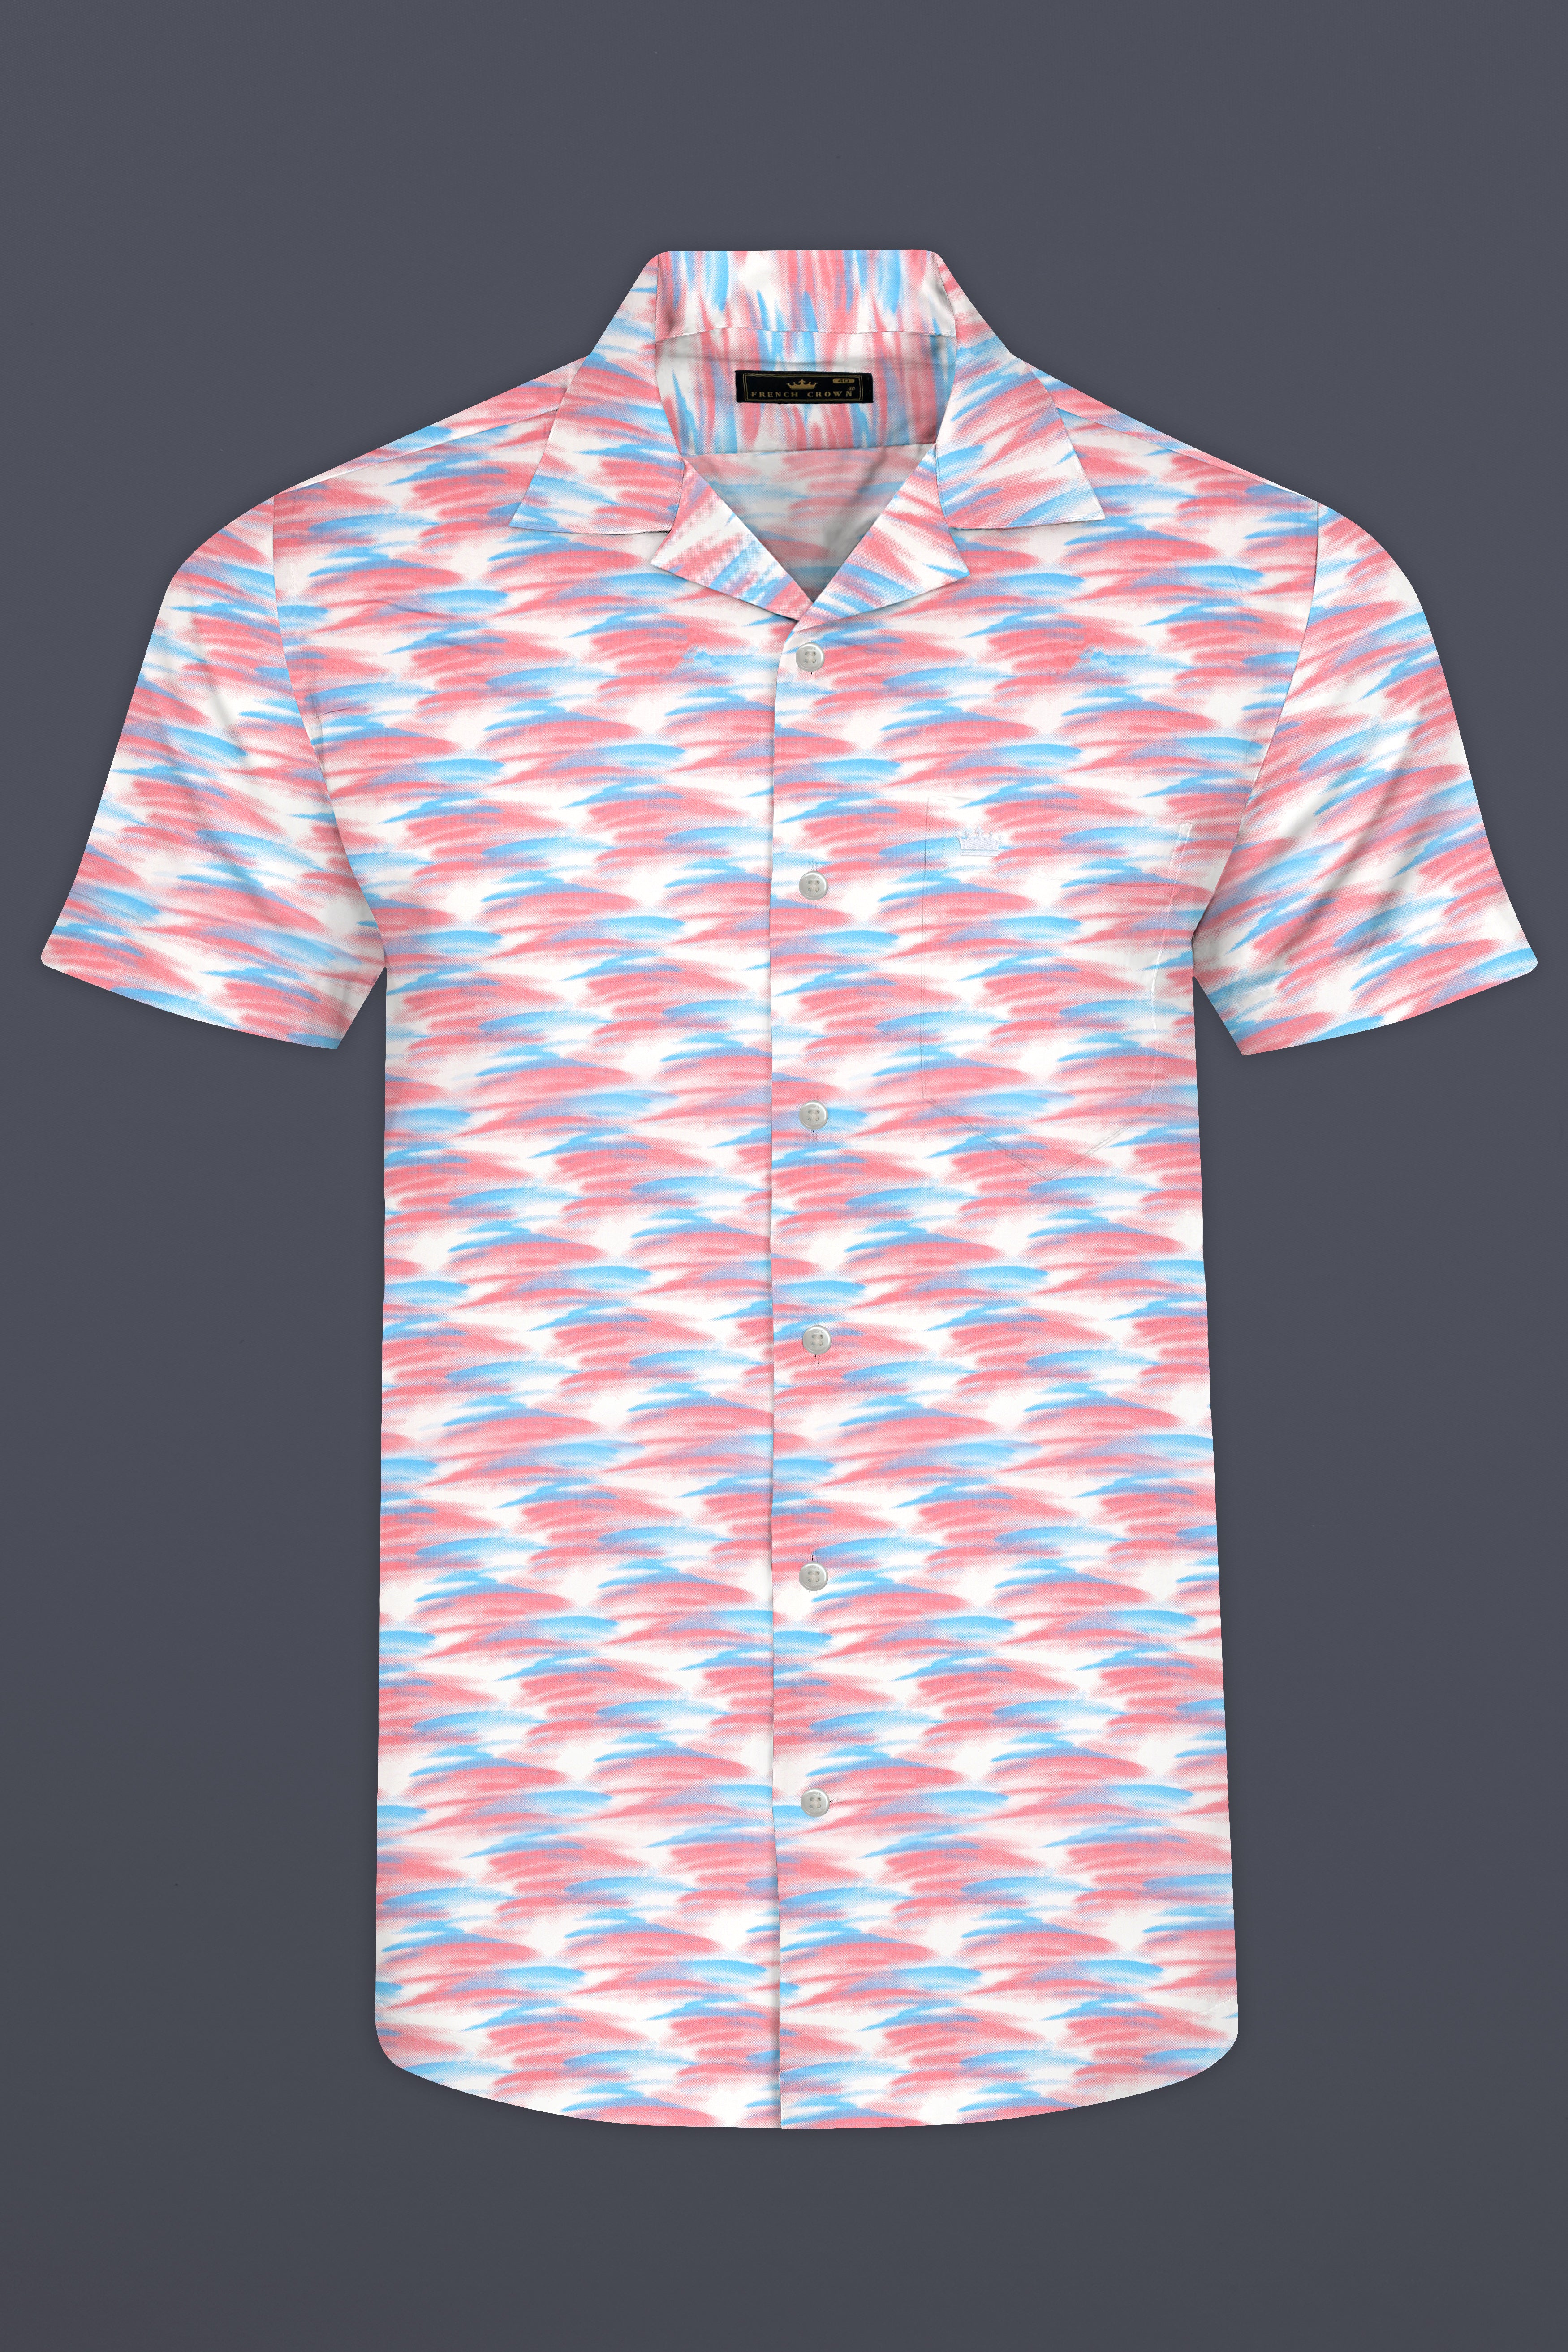 Thulian Pink and Hippie Blue with white abstract Printed Super Soft Premium Cotton Shirt